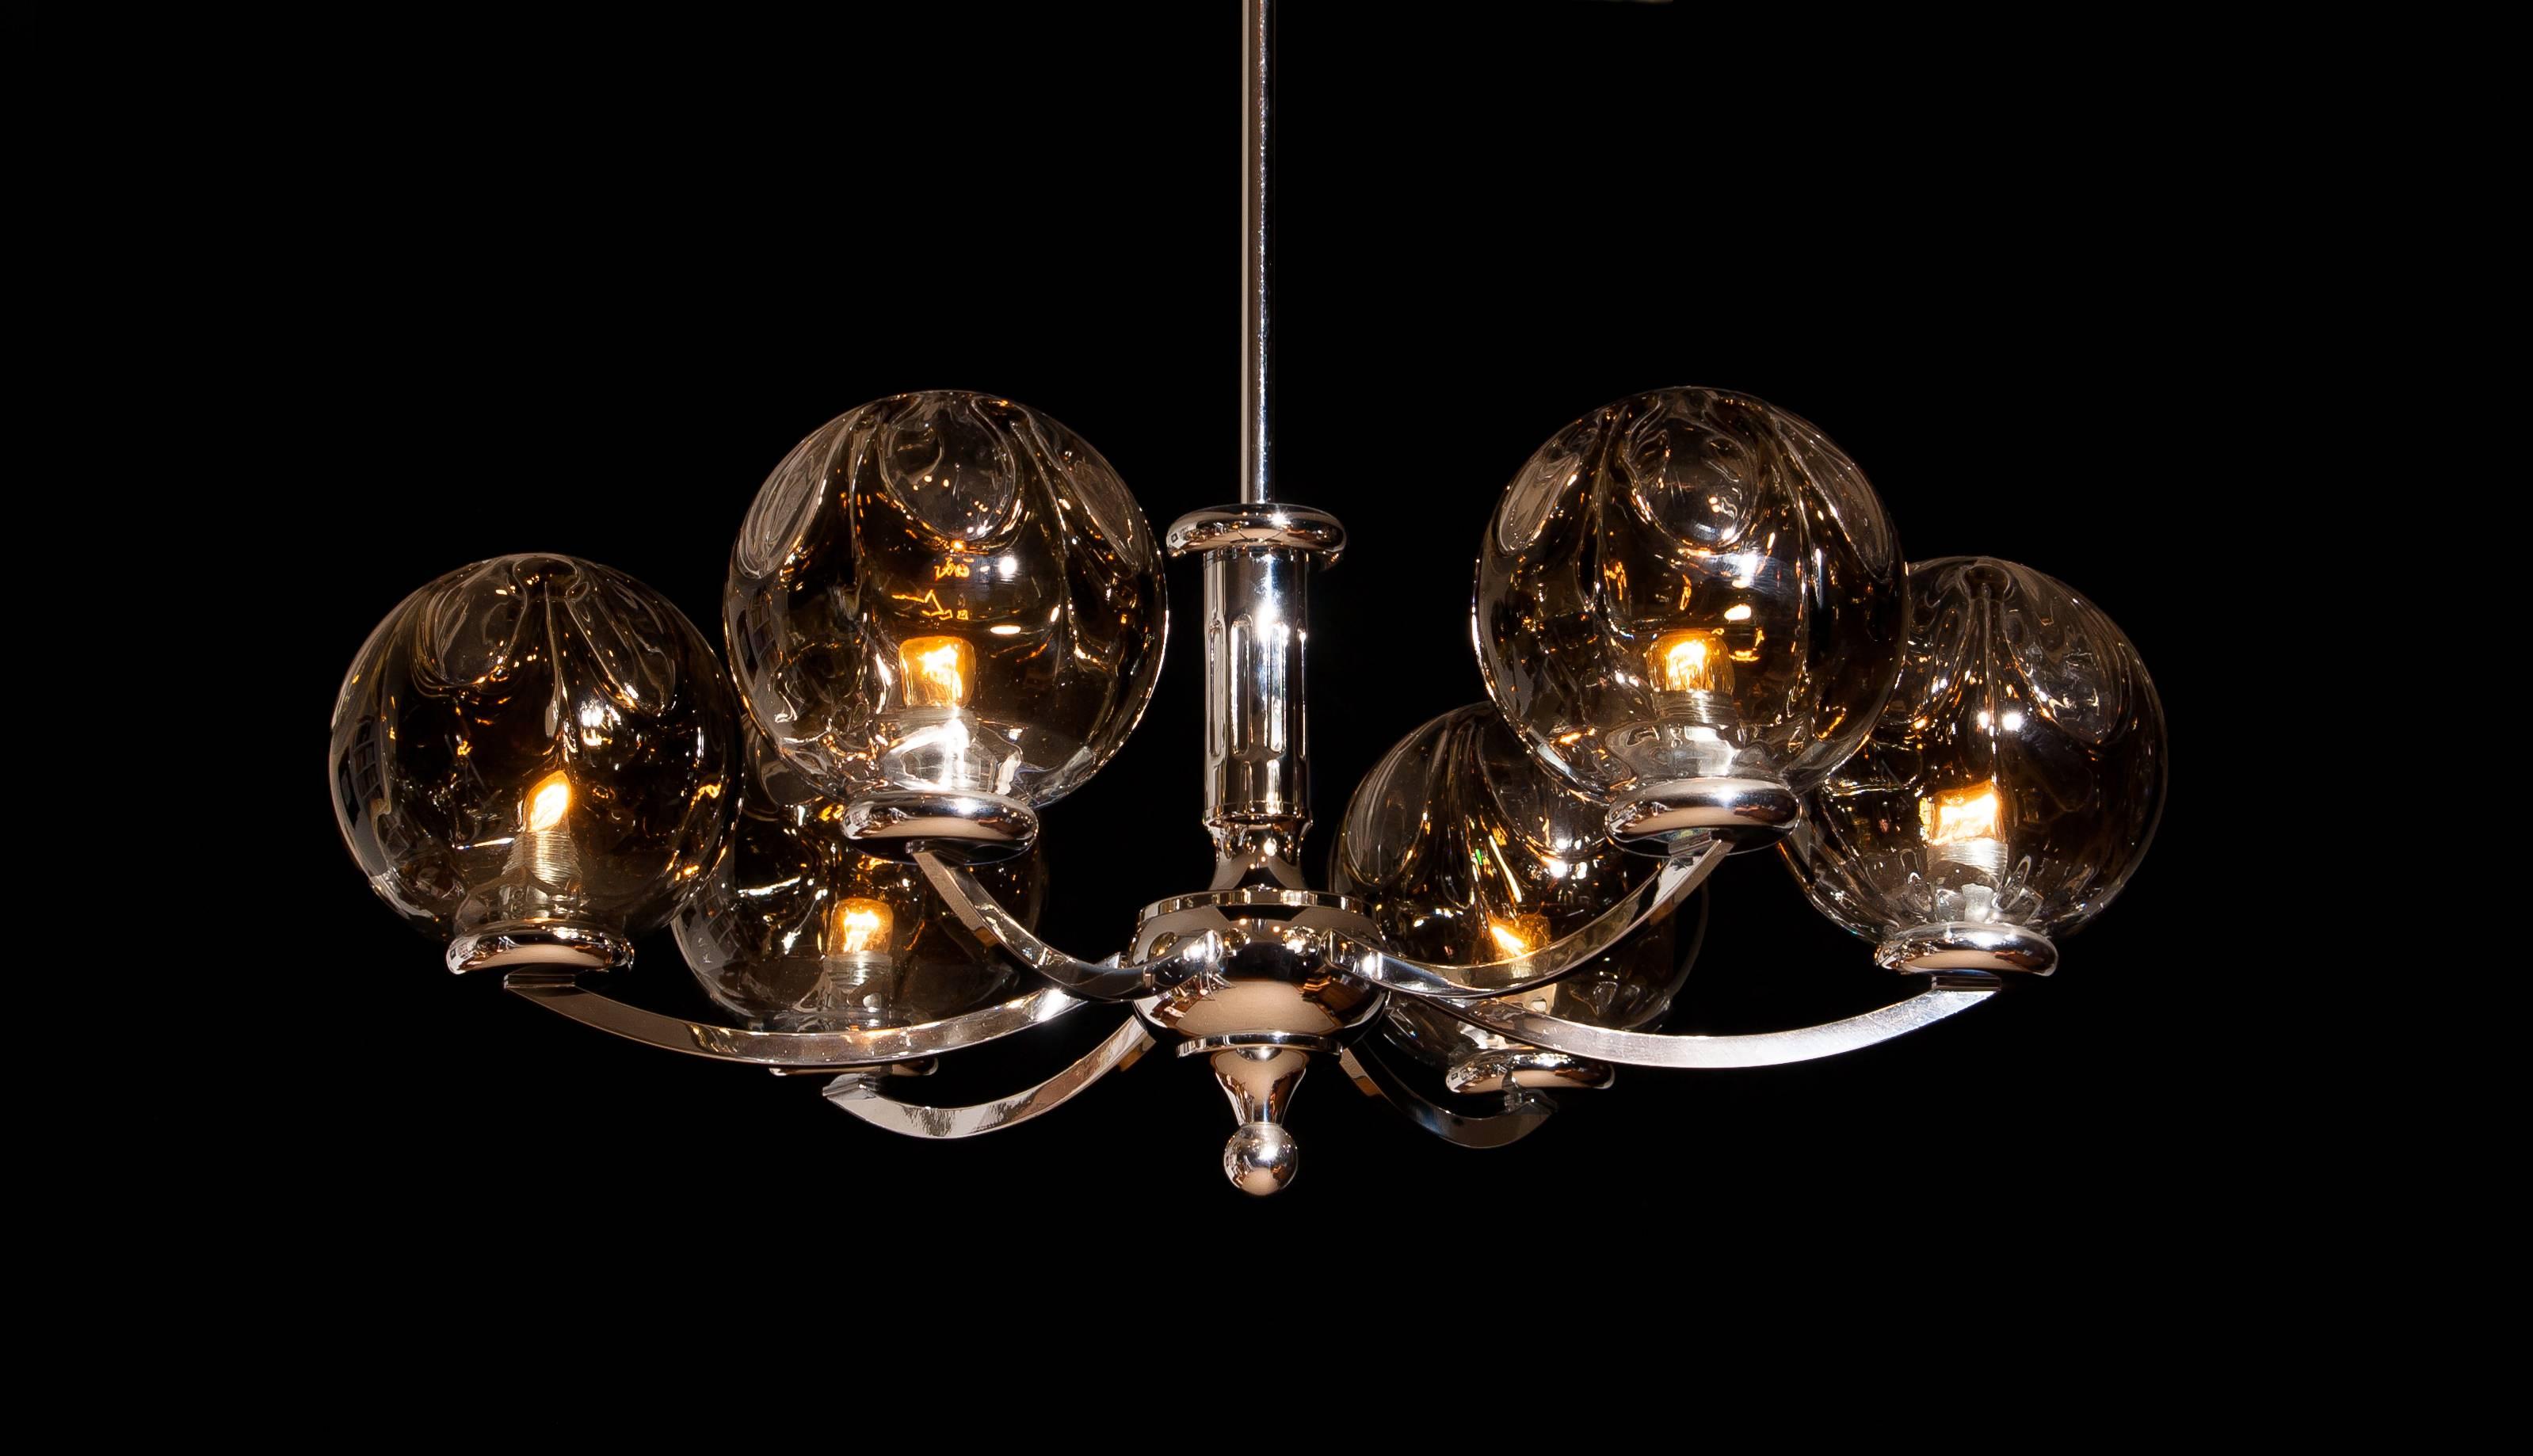 Exceptional beautiful chandelier made by Kaiser Leuchten in excellent condition.
This chandelier with the six original 